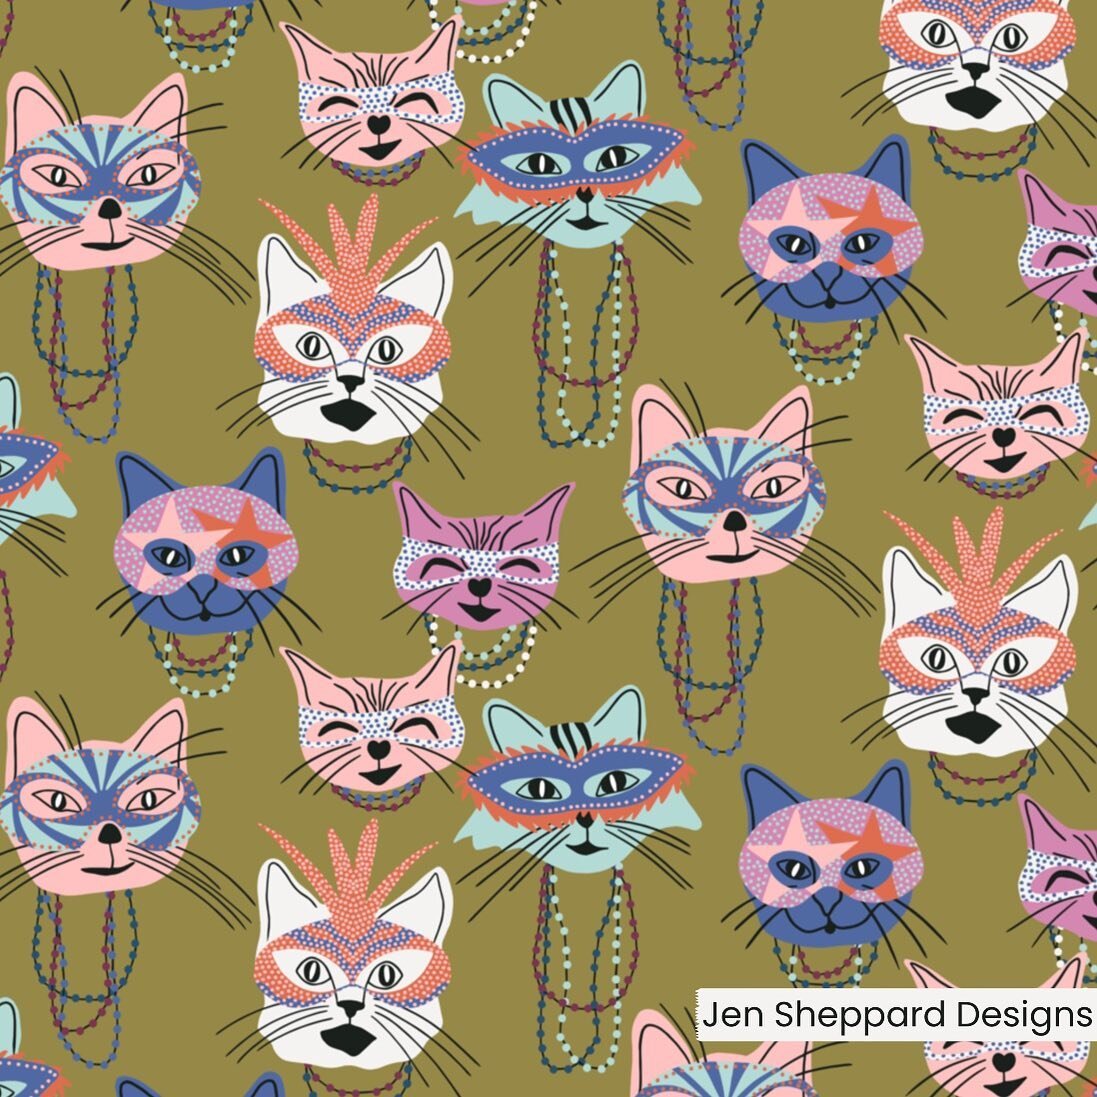 Happy Weekend! This Cats at Mardi Gras Design will be available in my Spoonflower shop soon.
.
.
.
.
.
#cats #kitties #pets #mardigras #beads #petsonvacation #march #duvetcover #vacationhome #spoonflowerdesigner #homedecor #bedsheets #styleabed
#spoo